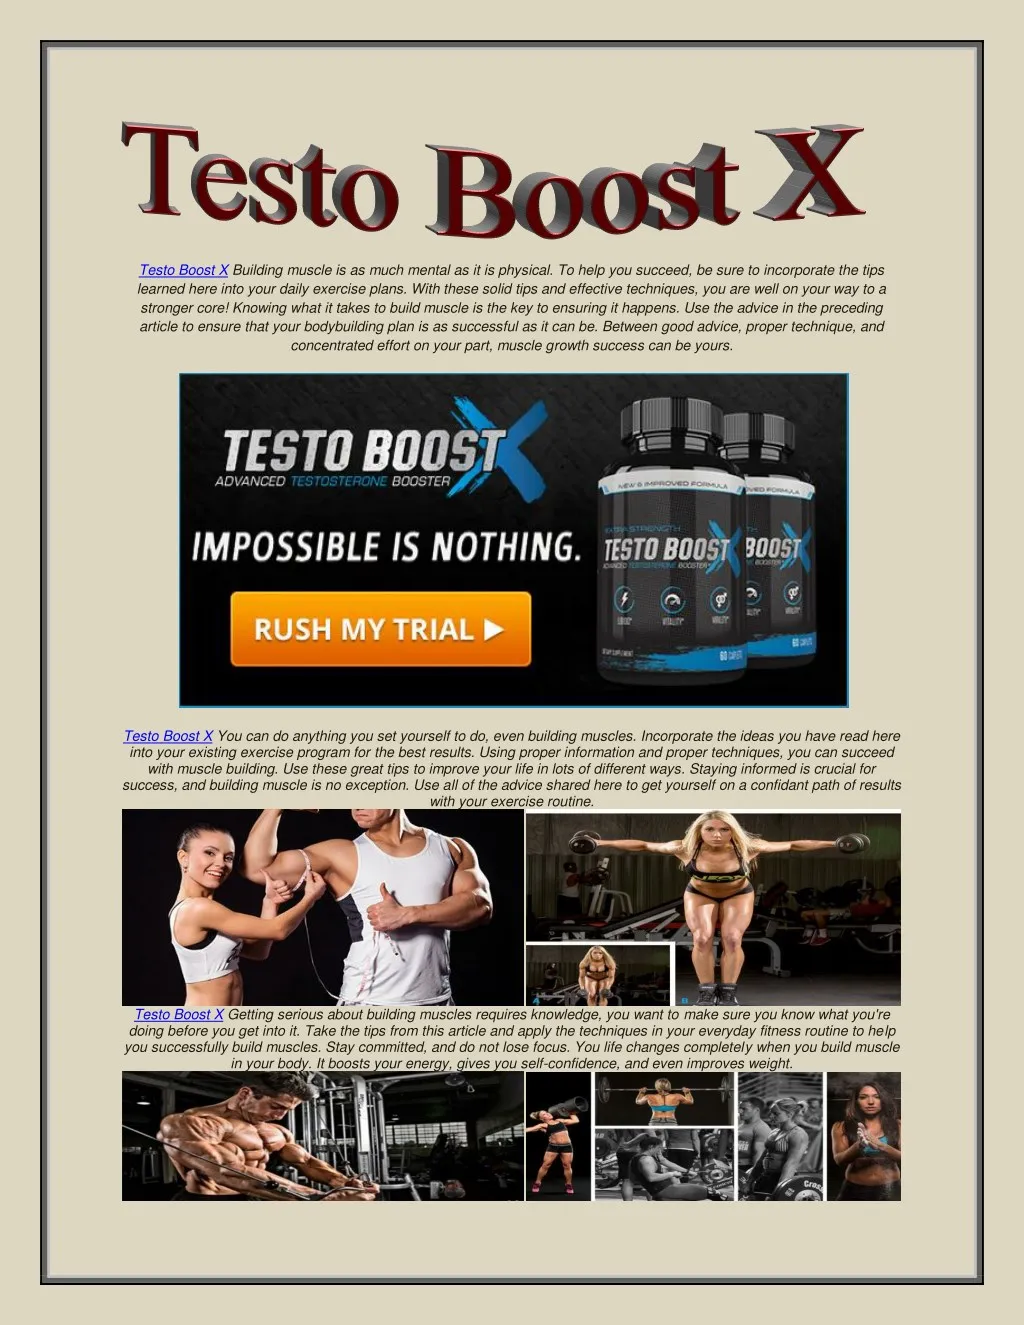 testo boost x building muscle is as much mental